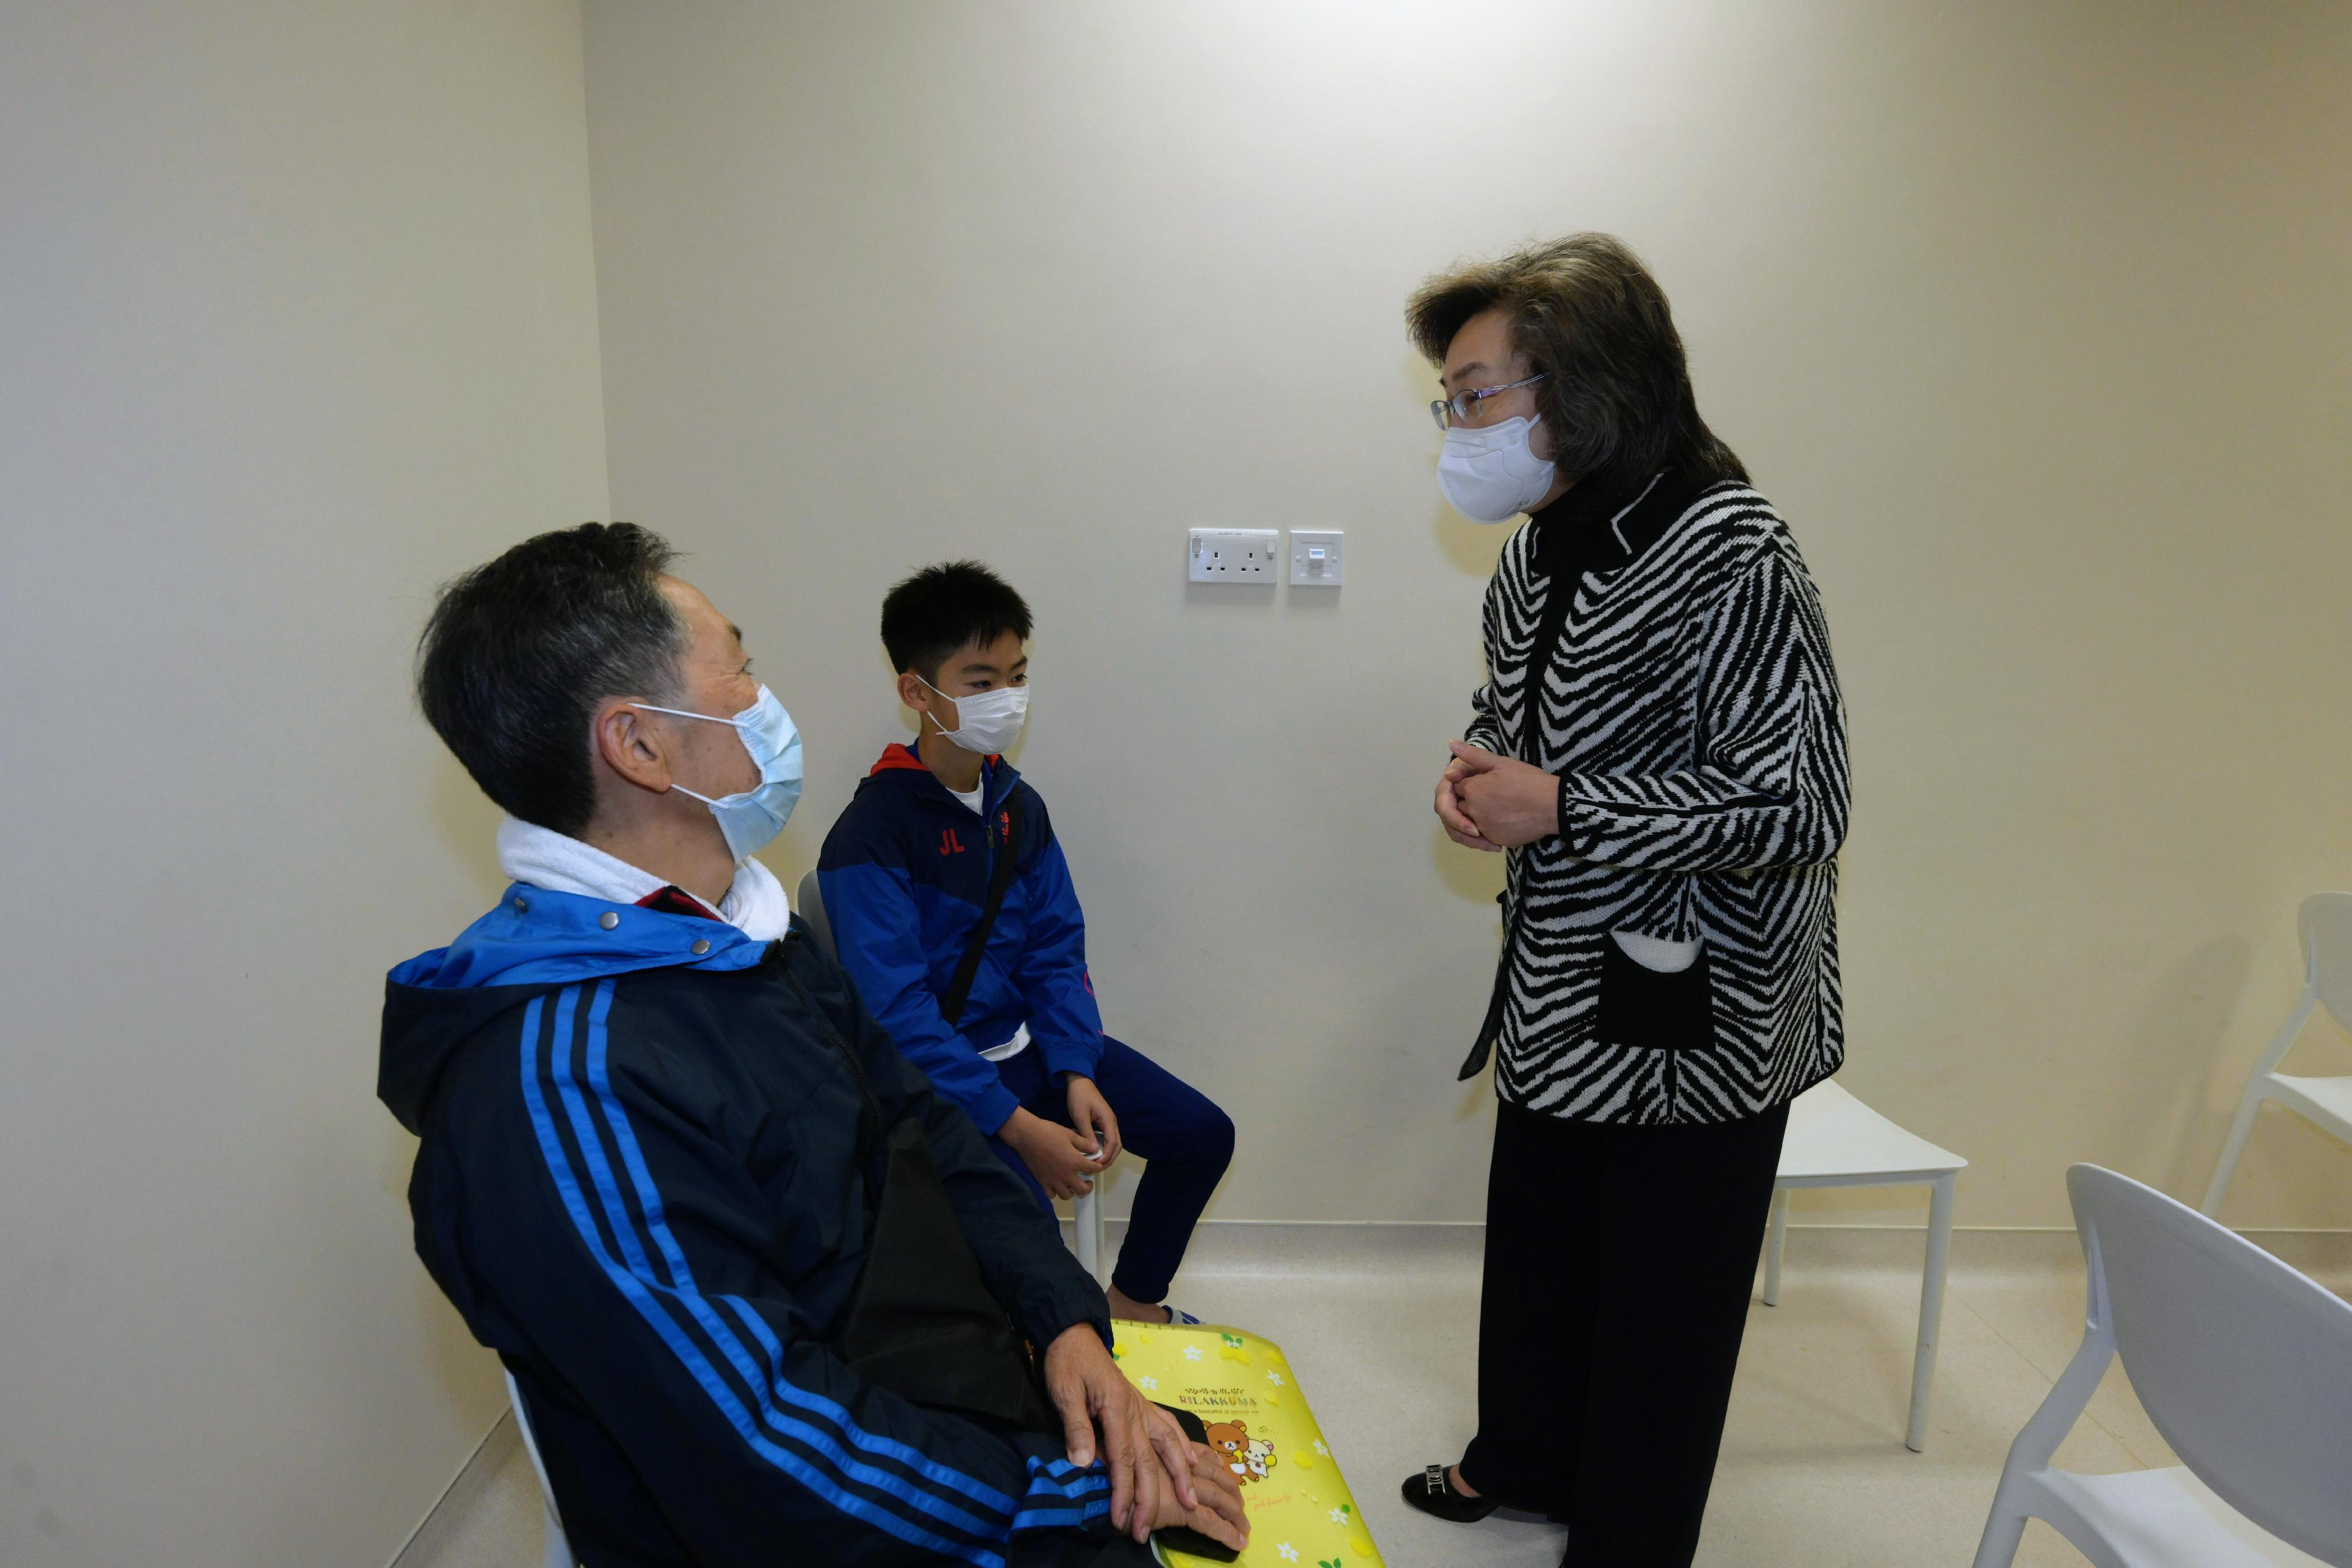 The Secretary for the Civil Service, Mrs Ingrid Yeung, visited the Community Vaccination Centre at CUHK Medical Centre today (December 1) to see for herself the BioNTech bivalent vaccination of the public. Photo shows Mrs Yeung (first right) chatting with a 13-year-old boy who came to receive his second dose of COVID-19 vaccine and his grandfather to learn about their views on COVID-19 vaccination.